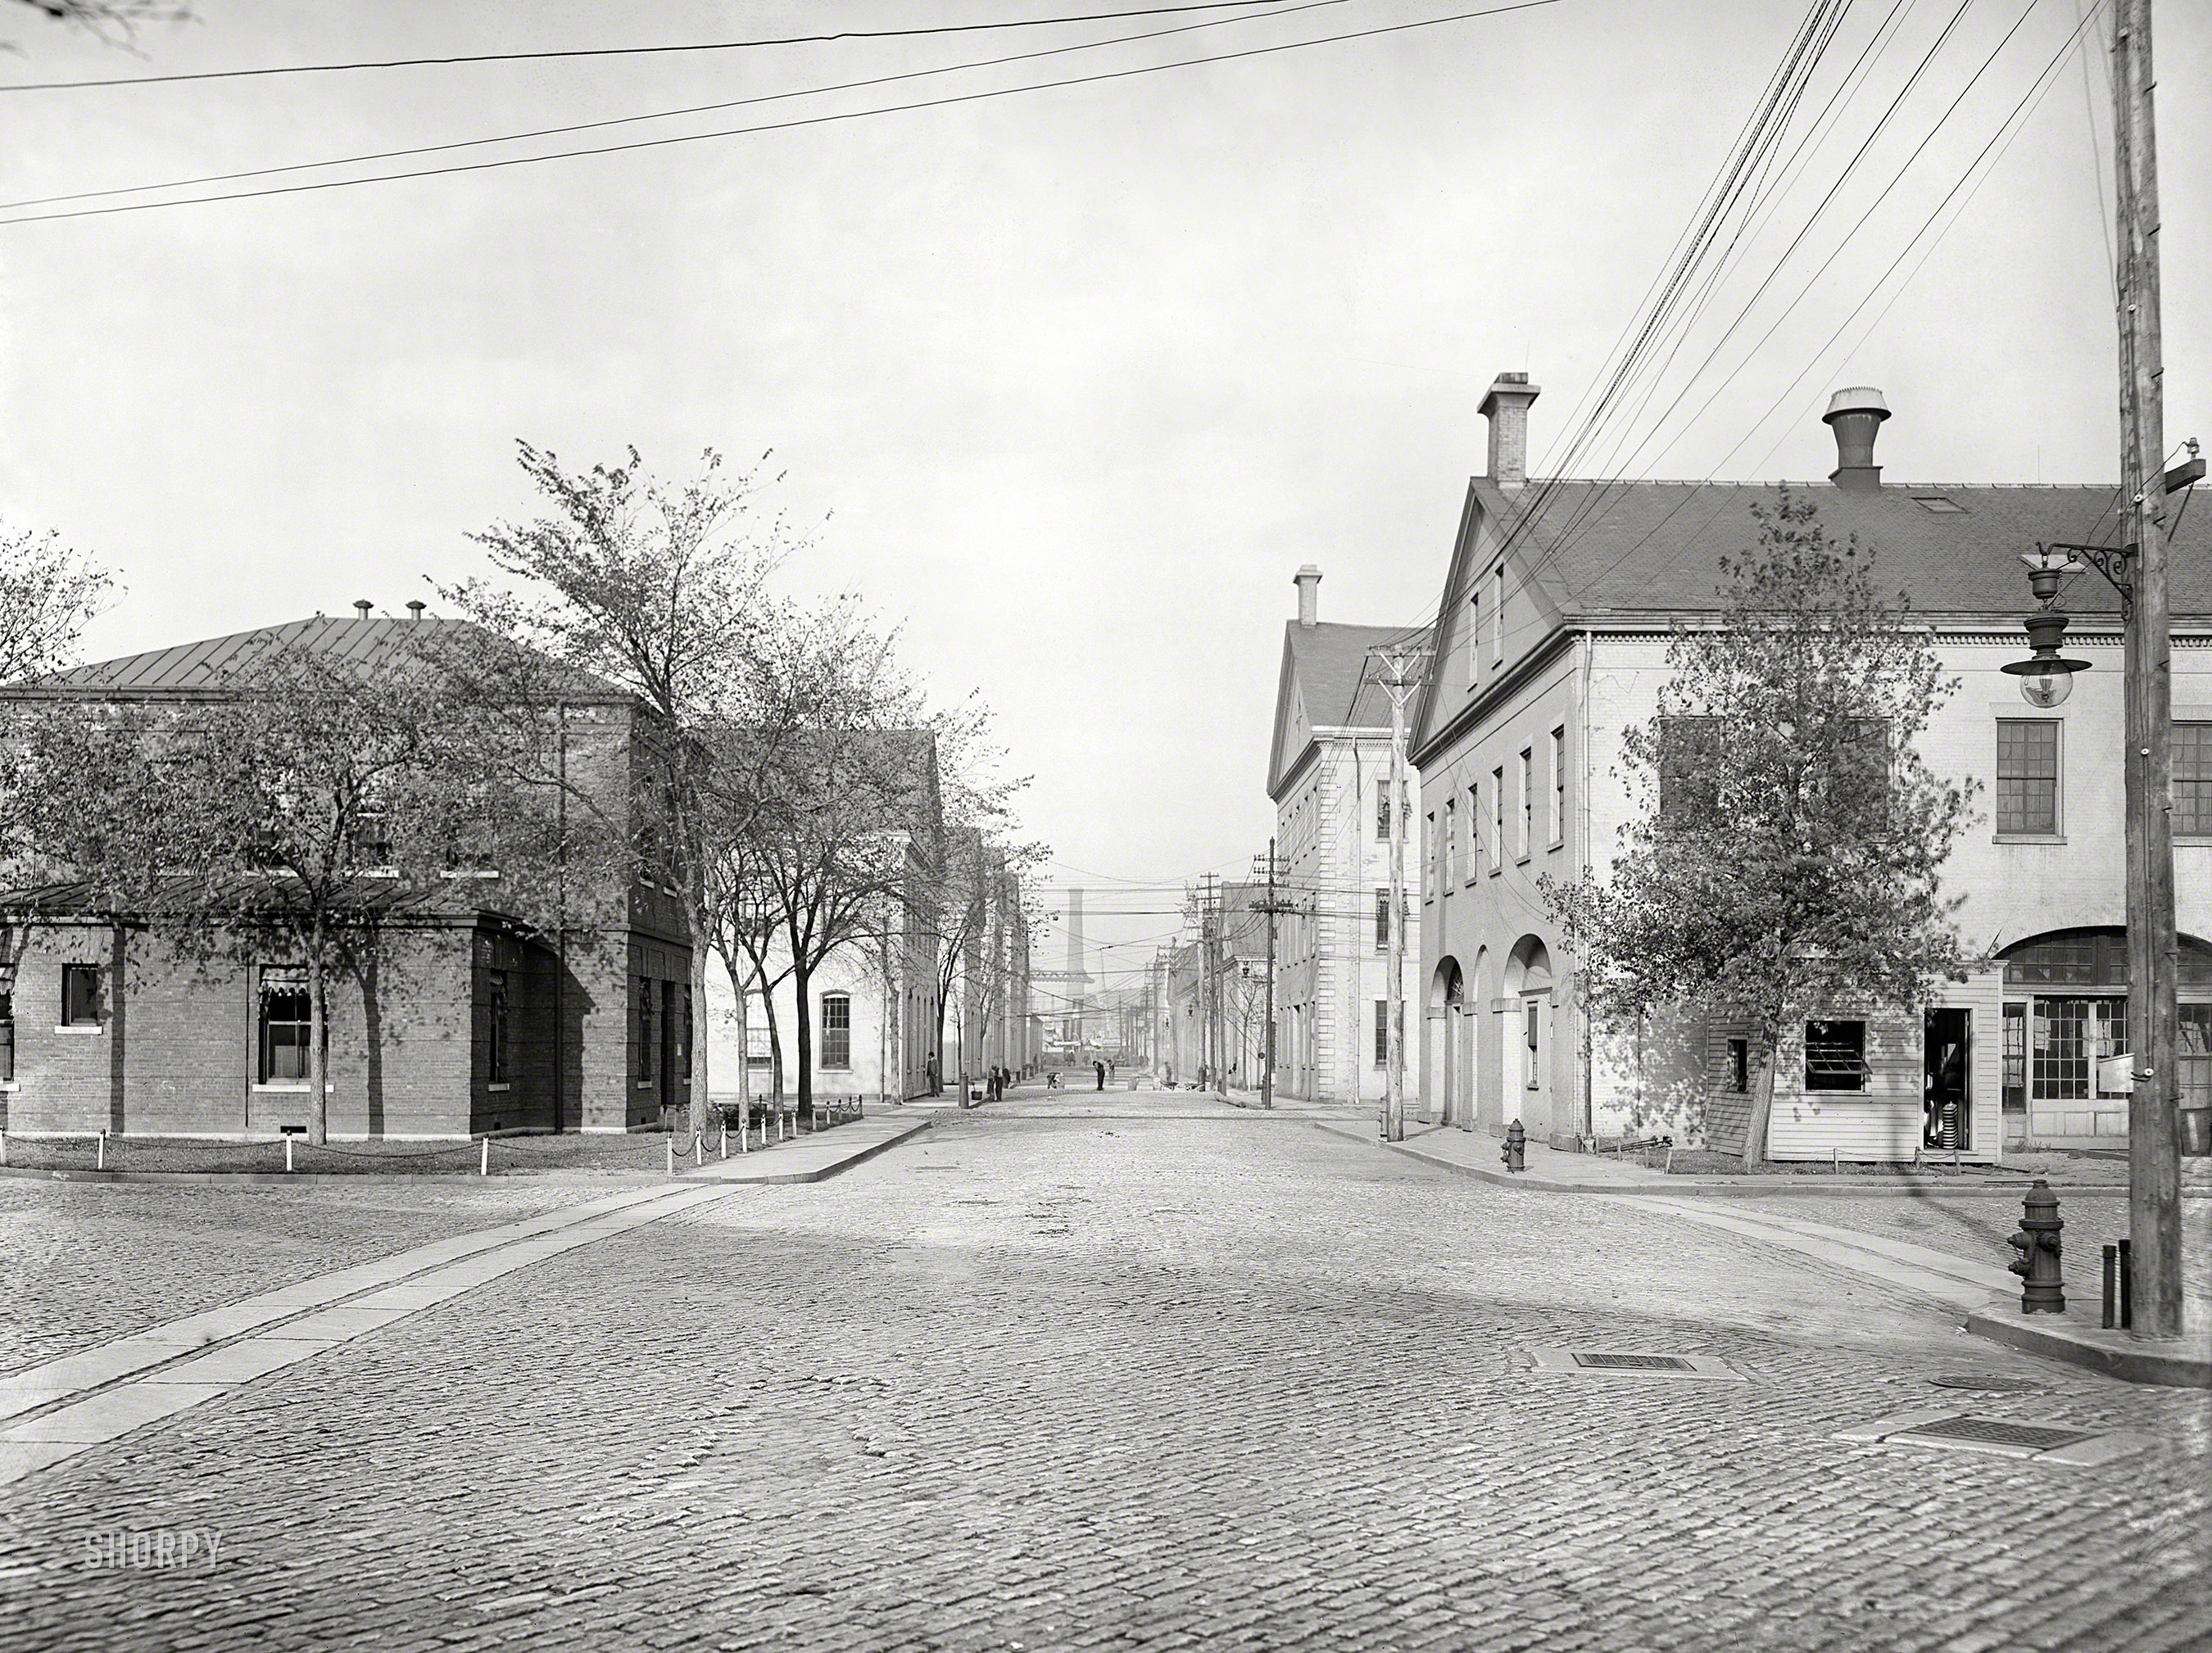 New York circa 1904. "Brooklyn Navy Yard -- view from Sands Street entrance." 8x10 inch dry plate glass negative, Detroit Publishing Company. View full size.